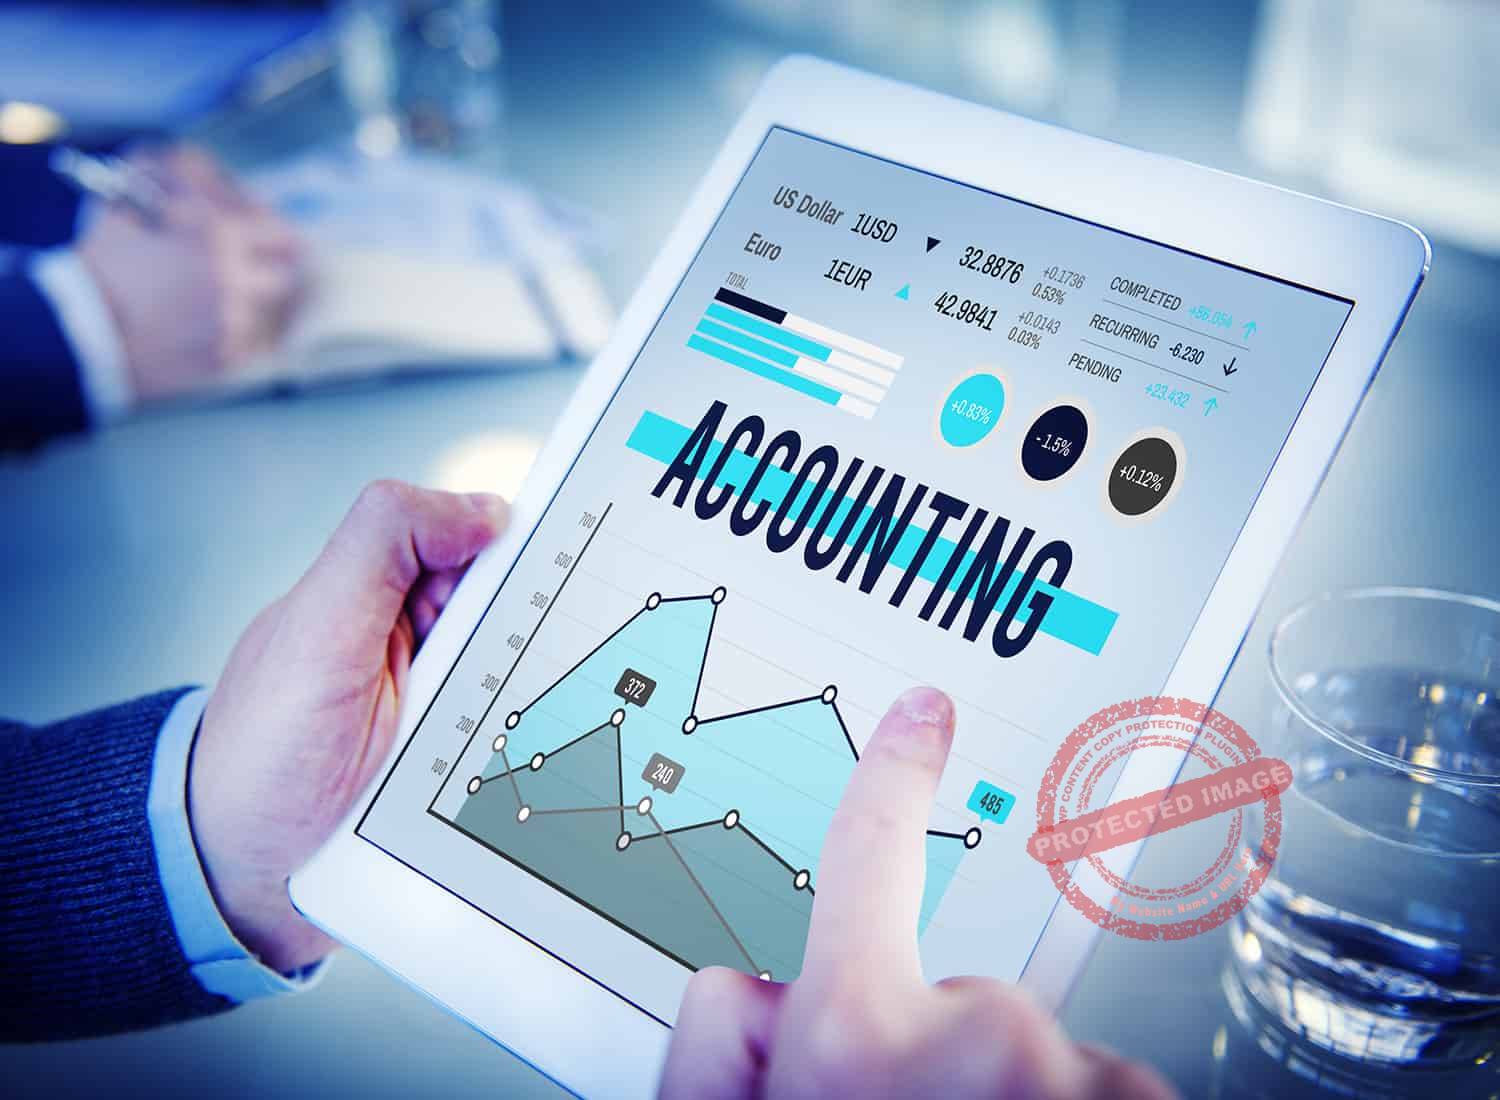 best small business software accounting